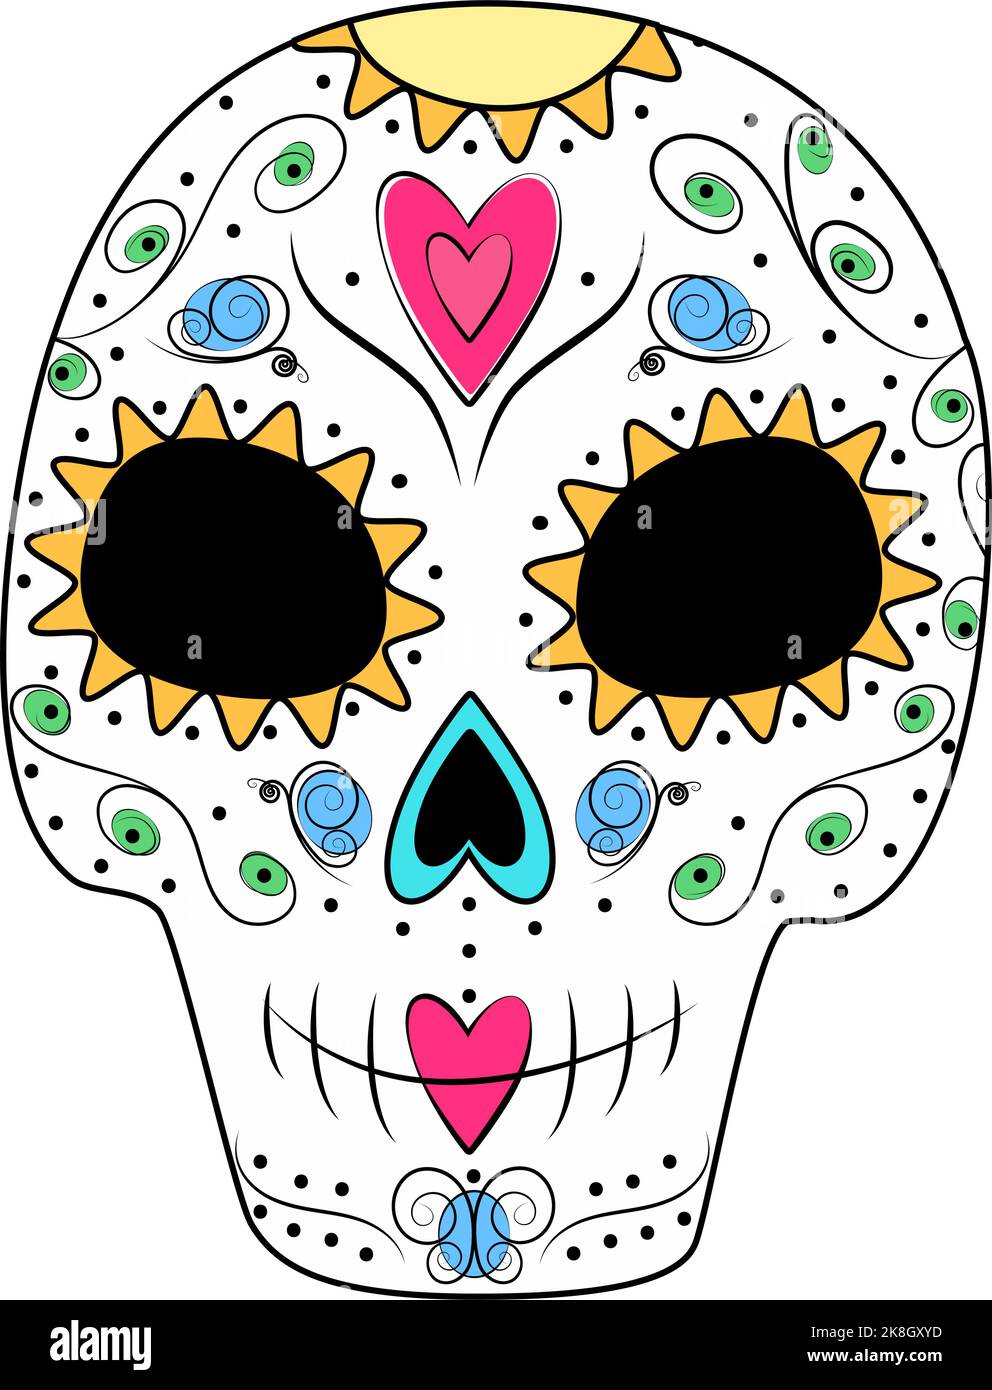 Sugar Skull with abstract pattern of floral elements in trendy marker colors. Isolate. Day of the Dead. Dia de los muertos. Mexico. Sticker, icon. Good for poster, card, invitations, price tag Stock Vector